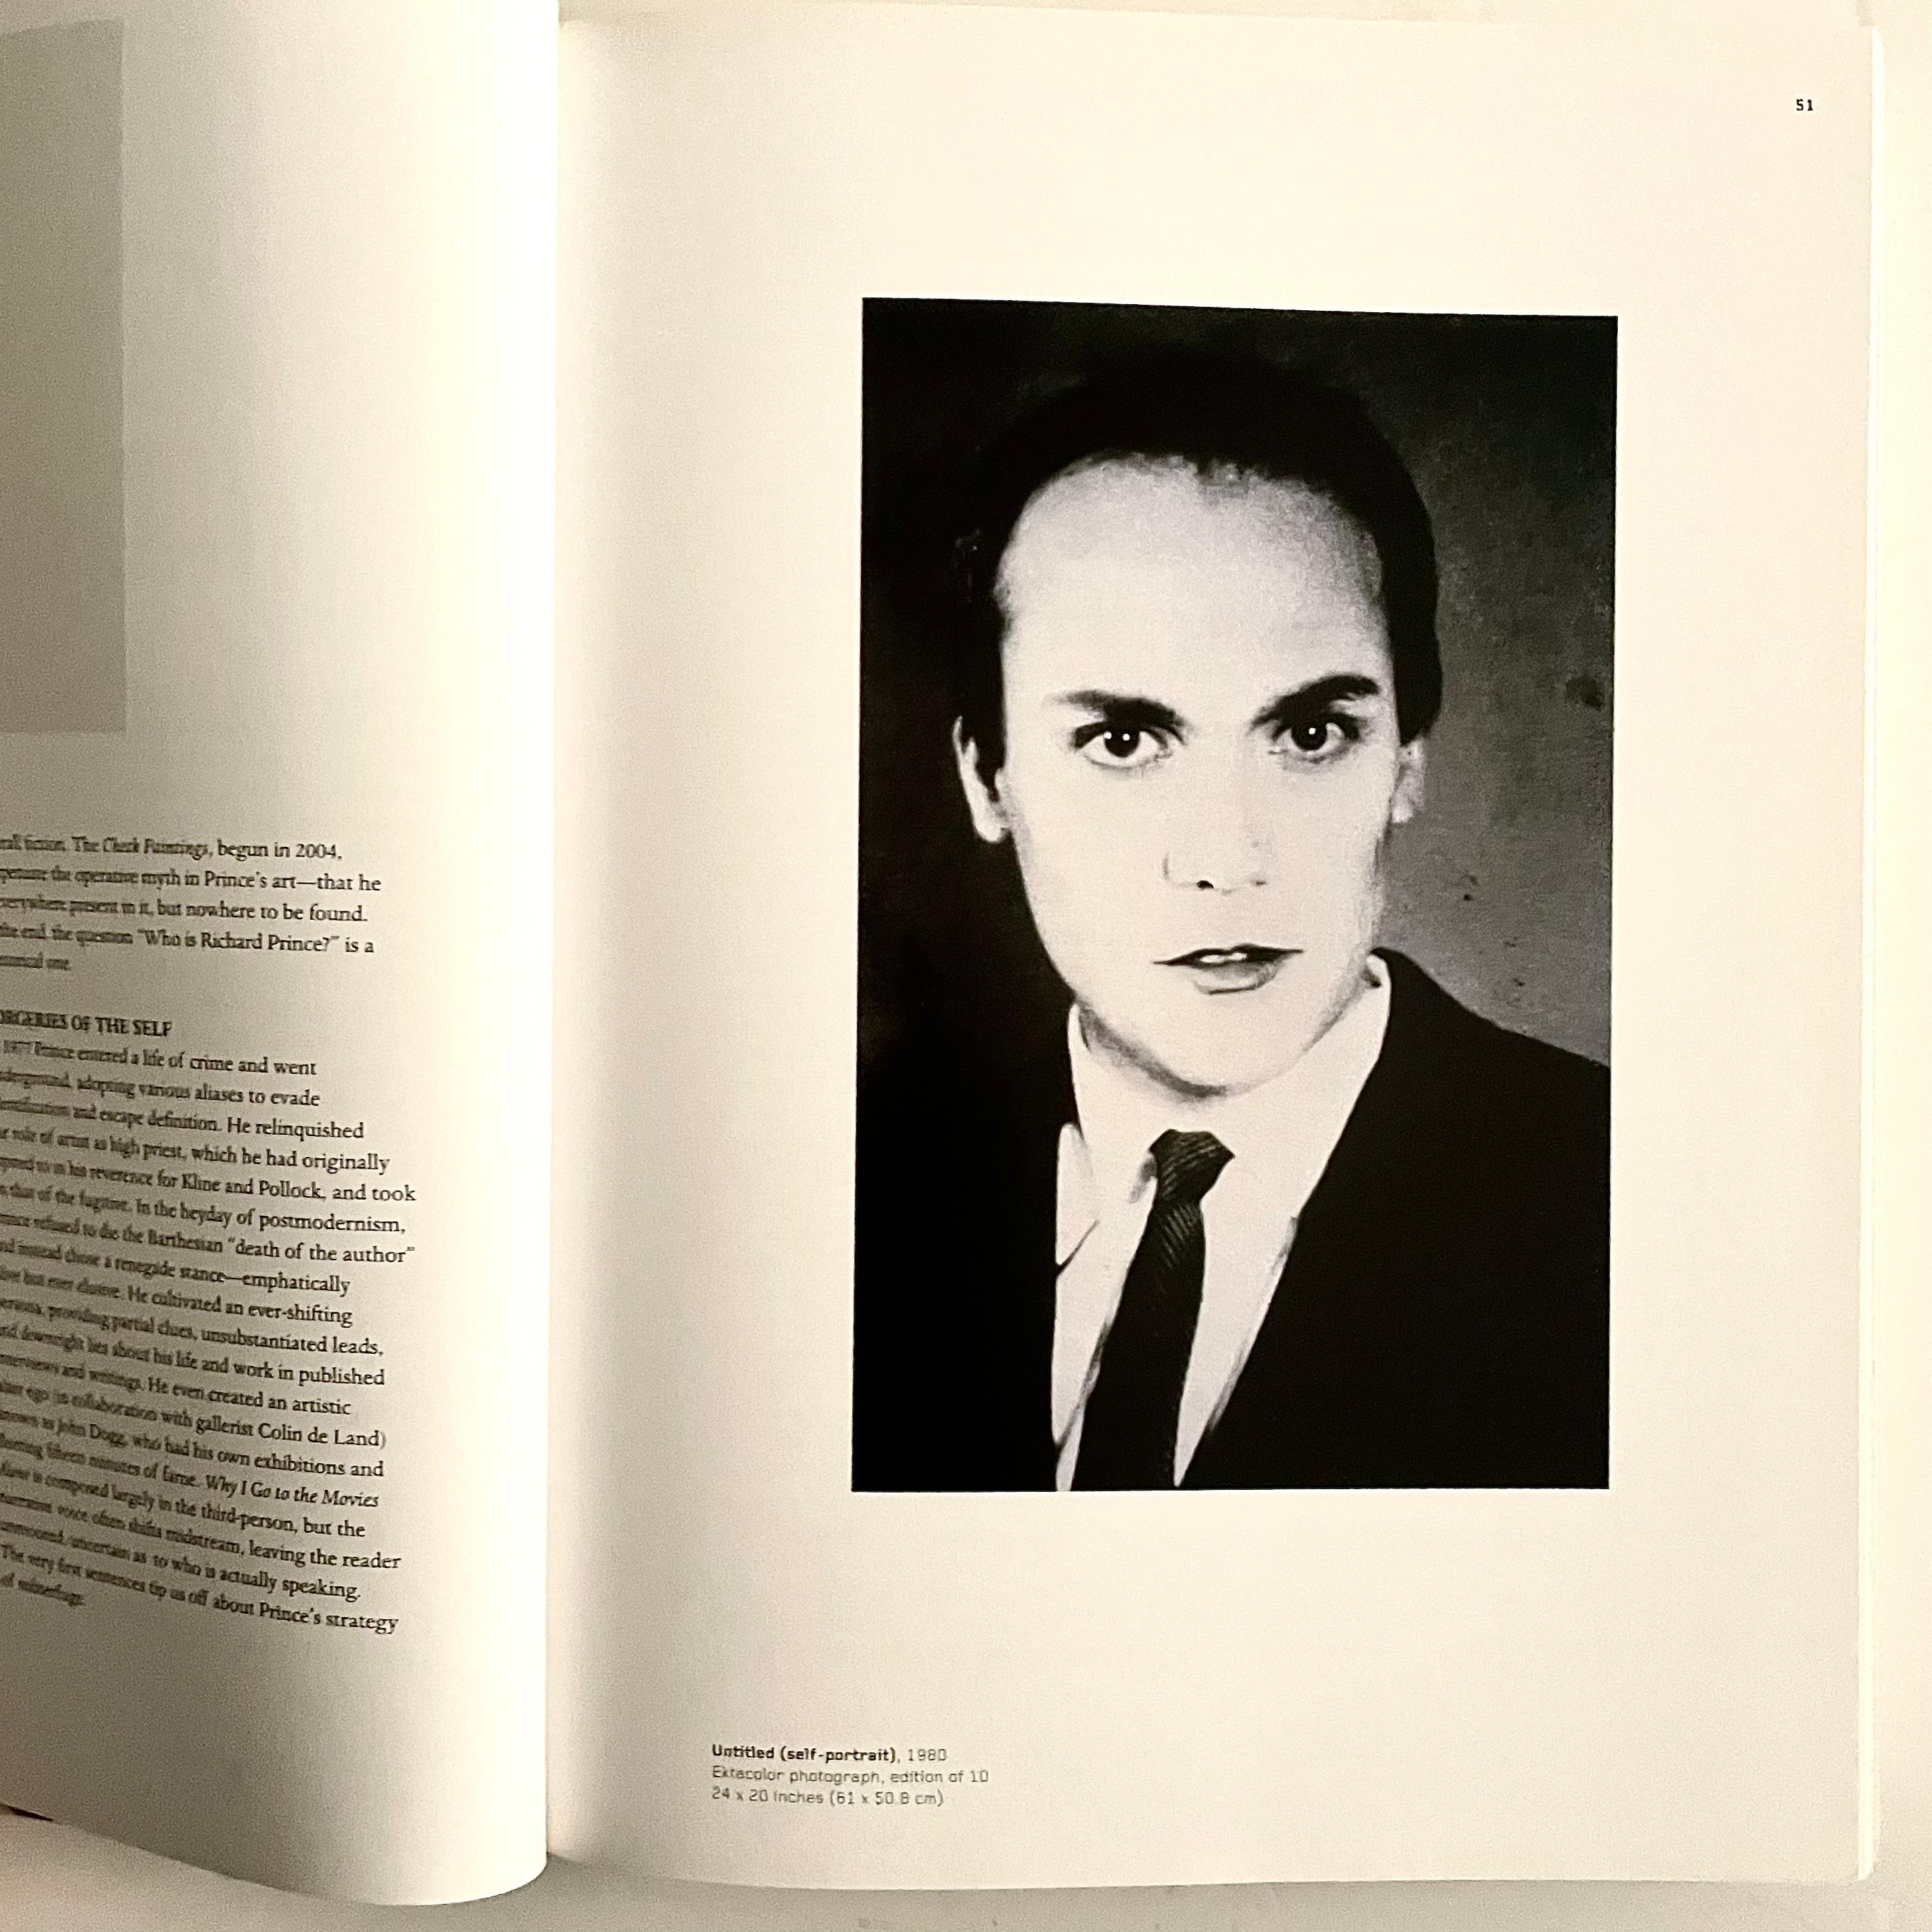 Published by the Guggenheim Museum 2007 Hardback

This is the exhibition book for tour/exhibition: 